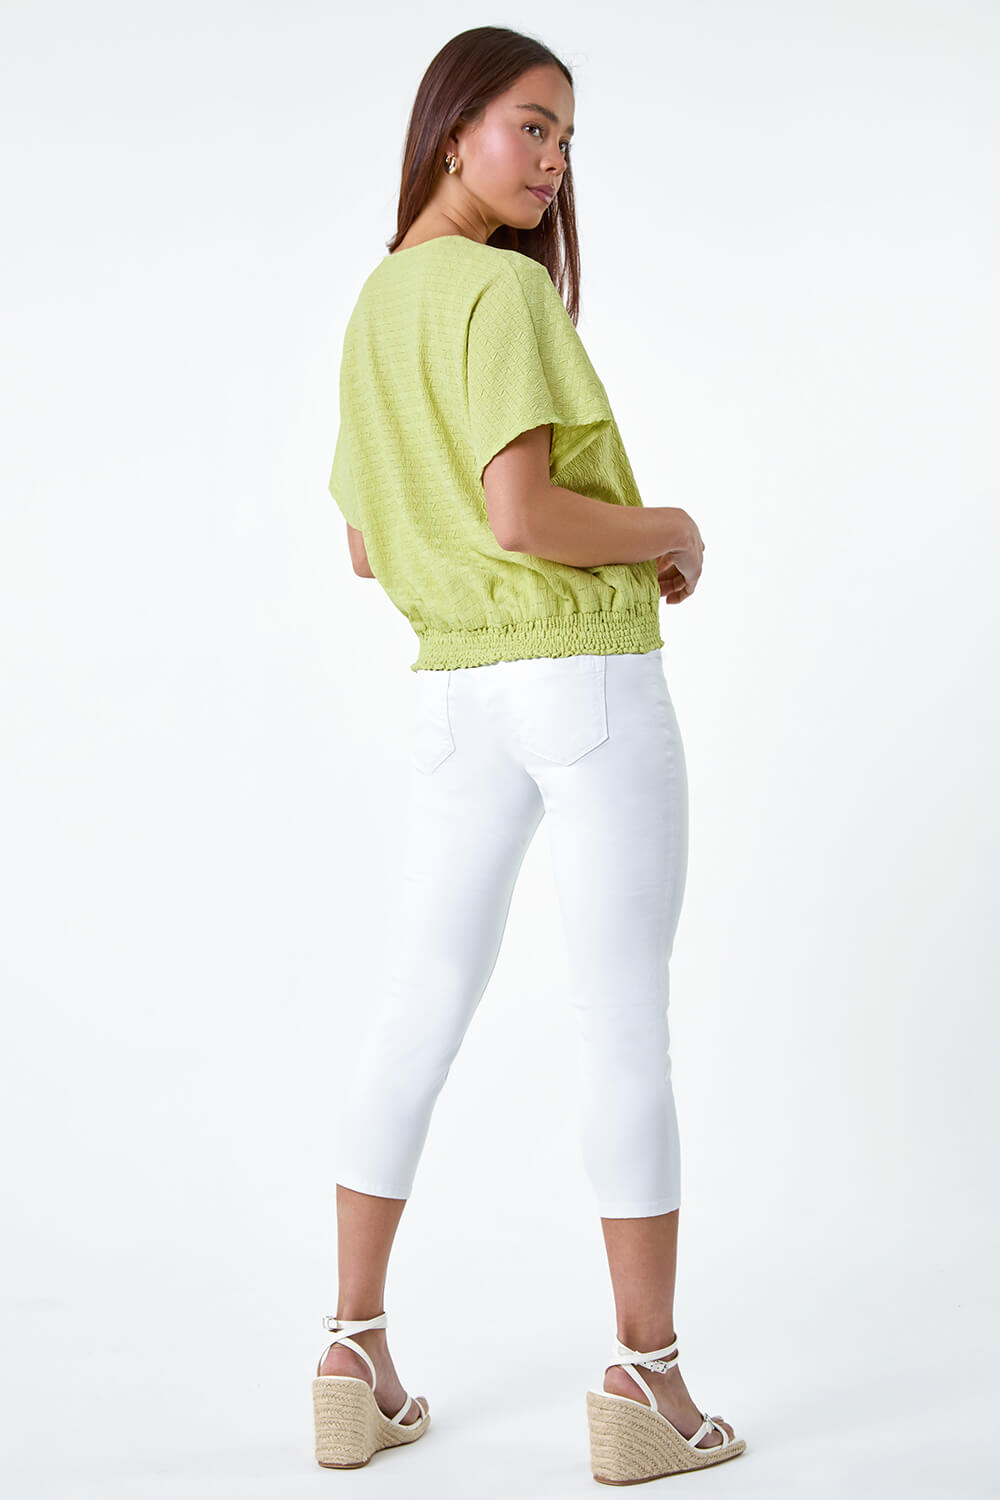 Sage Petite Textured Shirred Stretch Top, Image 3 of 5